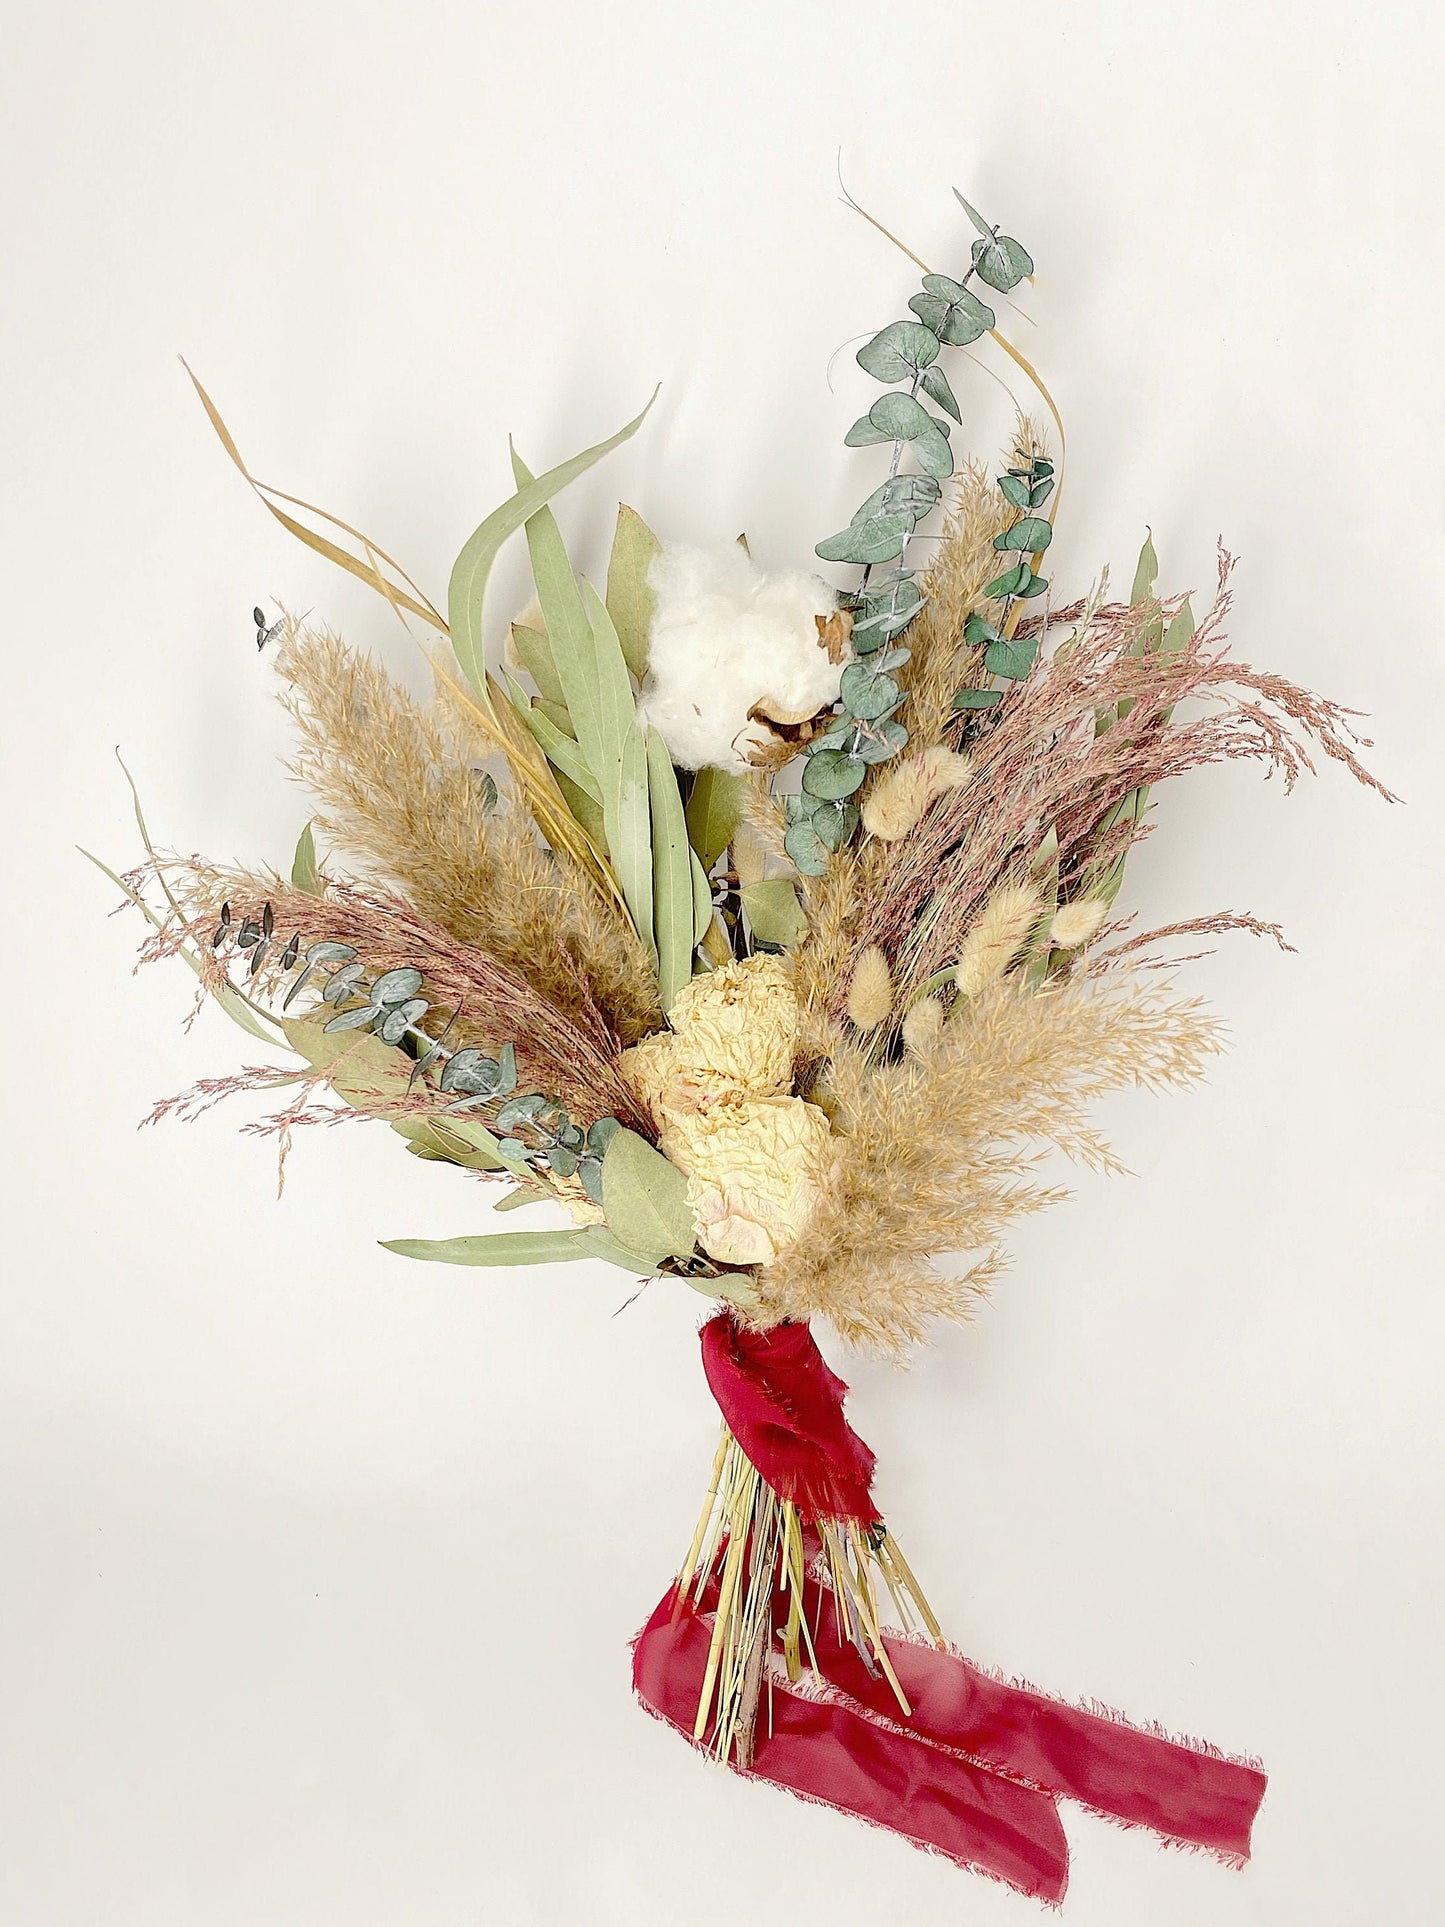 Nude Wedding Bouquet, Pampas grass, Eucalyptus, Cream, Bridal, Cotton, Peonies, Preserved Flowers, Dried Flowers, Summer, Modern Bunny Tails